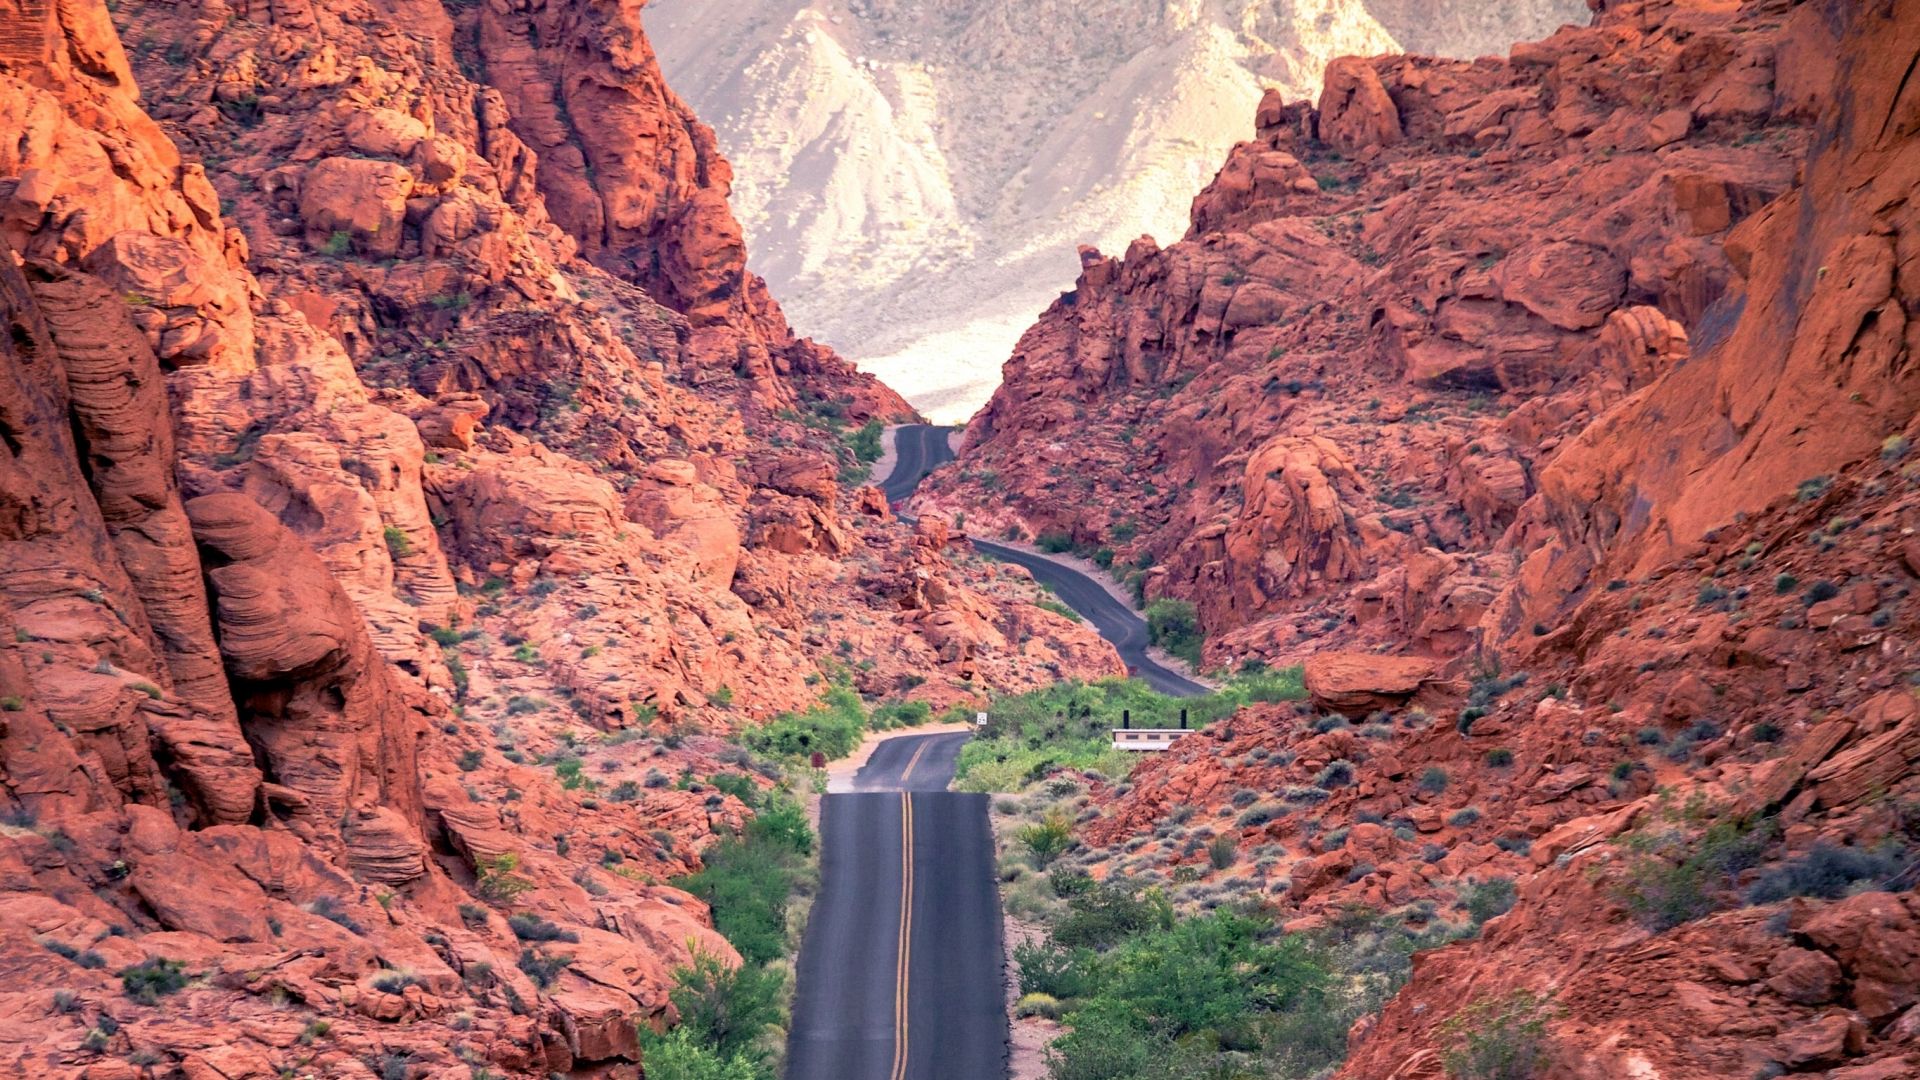 Desktop wallpapers road, highway, valley of fire, rocky valley, hd image, picture, background, 20763c